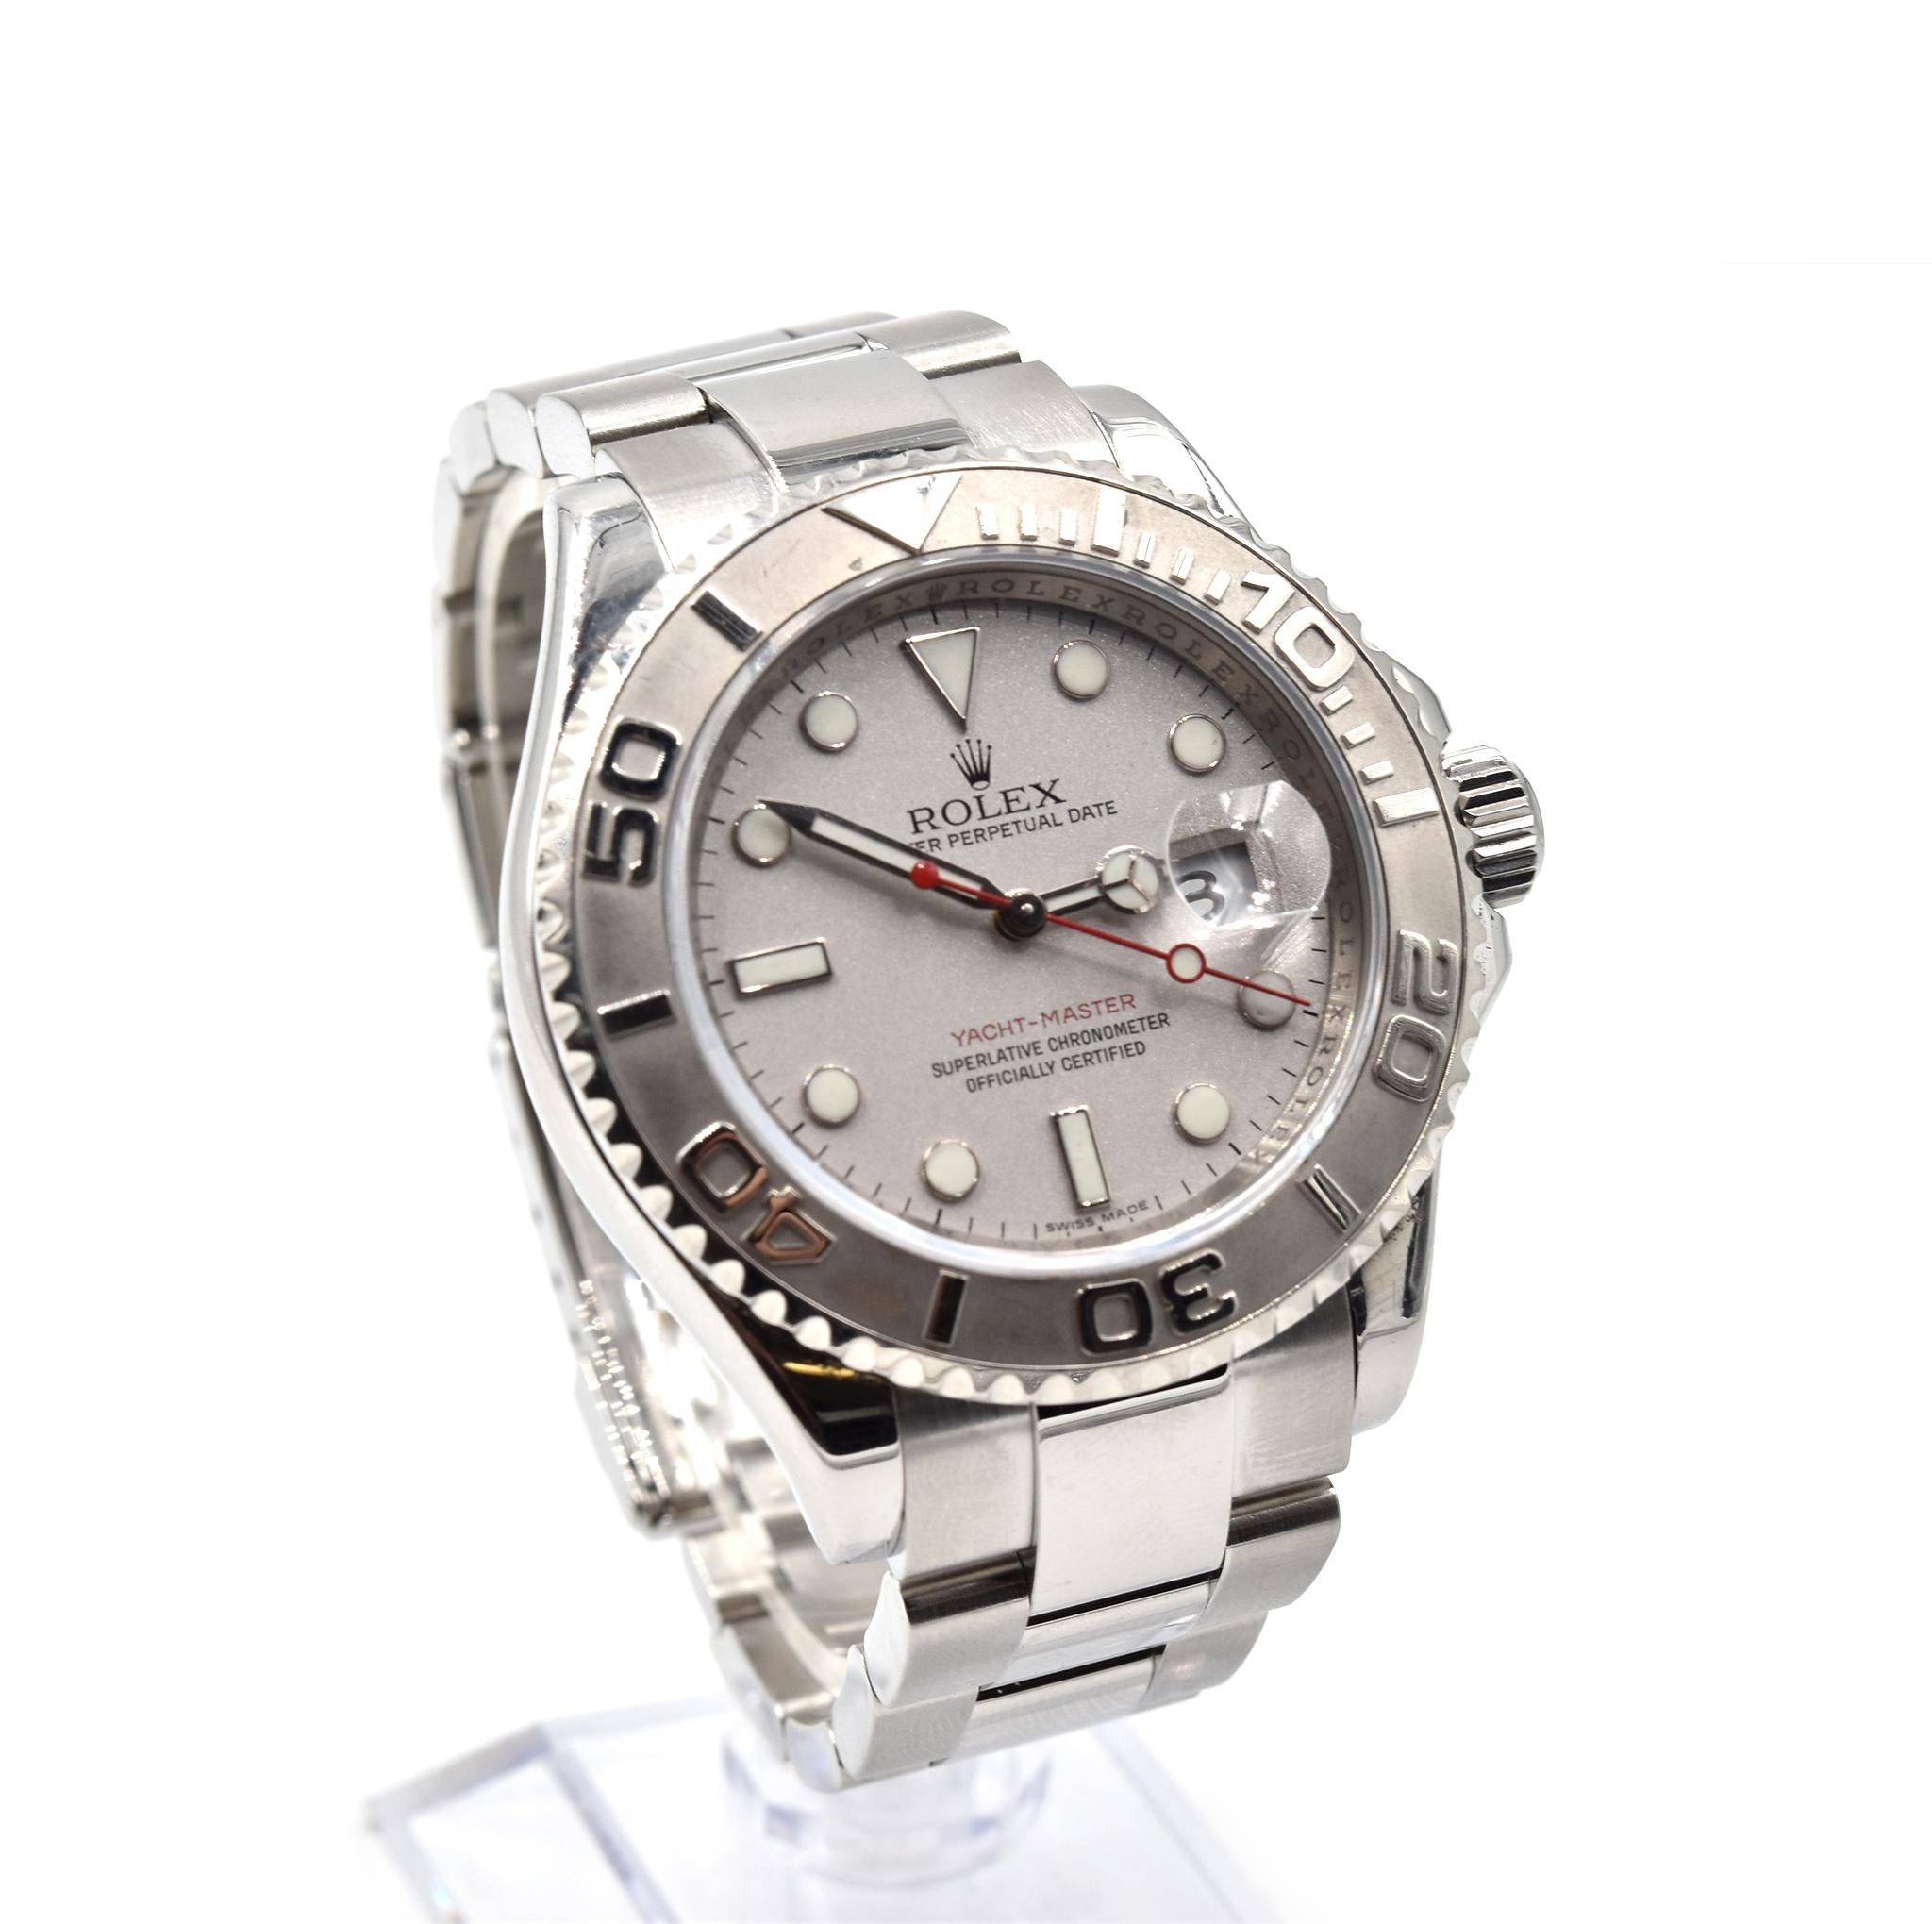 Movement: automatic                                                              
Function: hours, minutes, seconds, date, GMT
Case:  round 40mm stainless steel case with platinum bezel, scratch resistant crystal, screw-down crown, water resistant